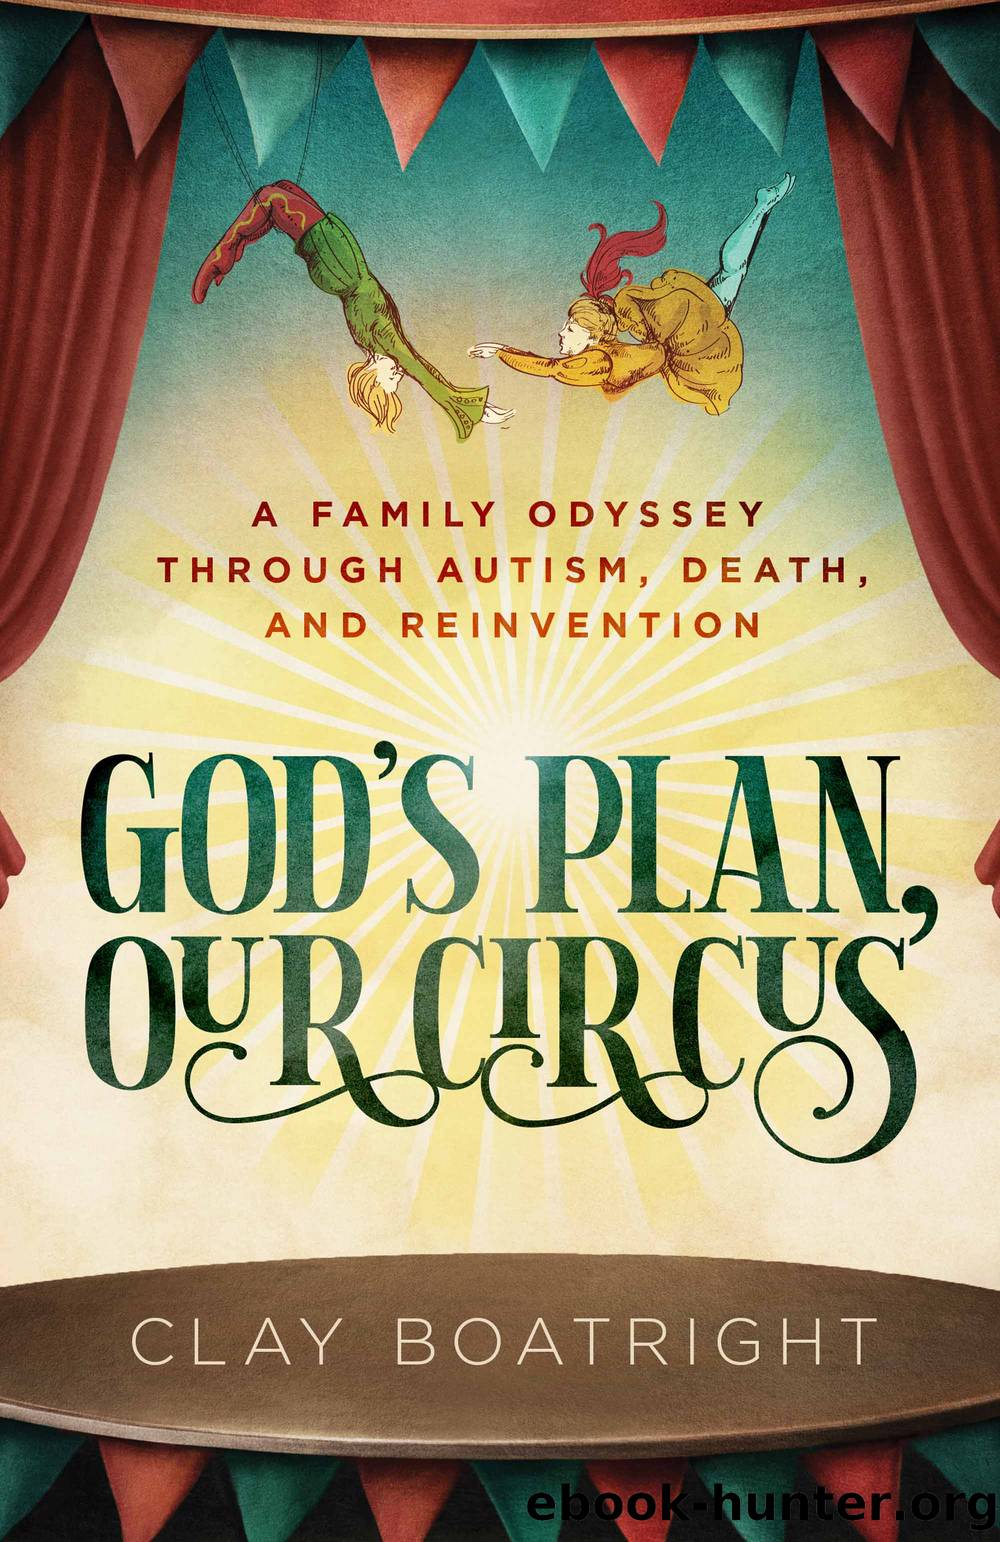 God's Plan, Our Circus by Clay Boatright